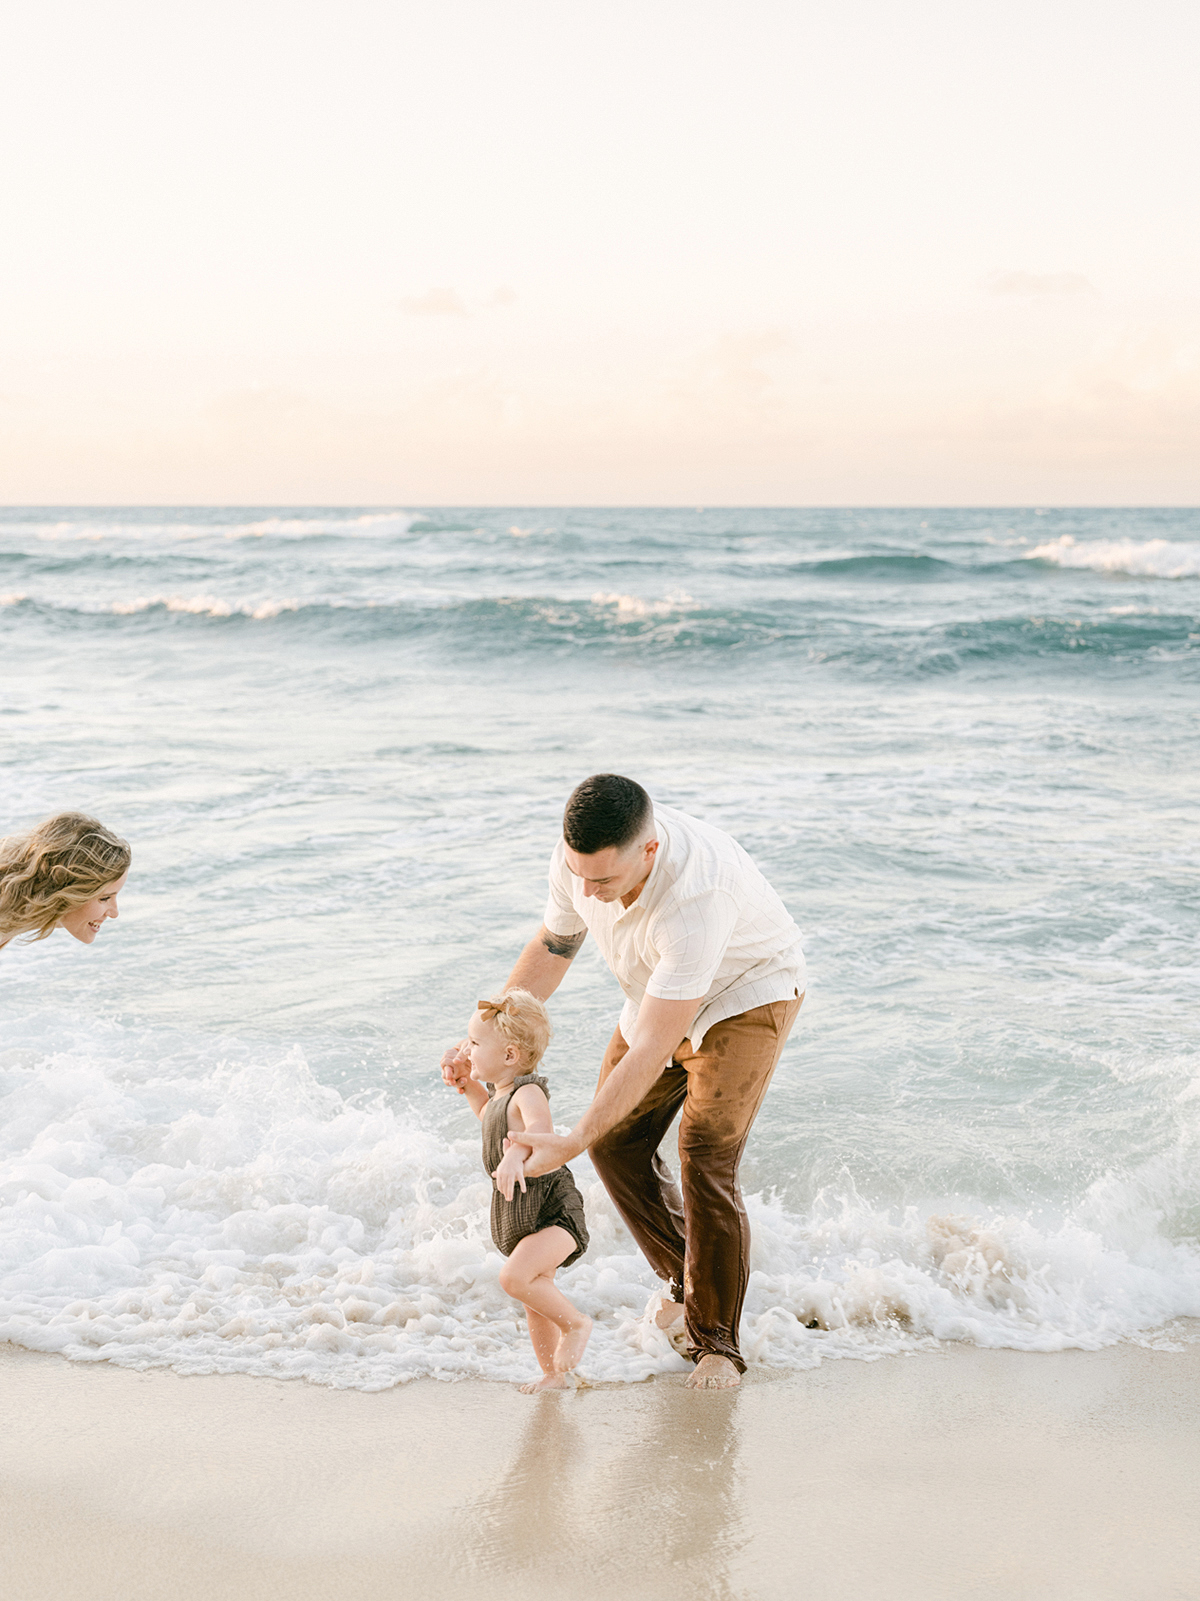 What to wear hawaii family photos | tips and tricks for styling your session from local photographer, Laura Ivanova